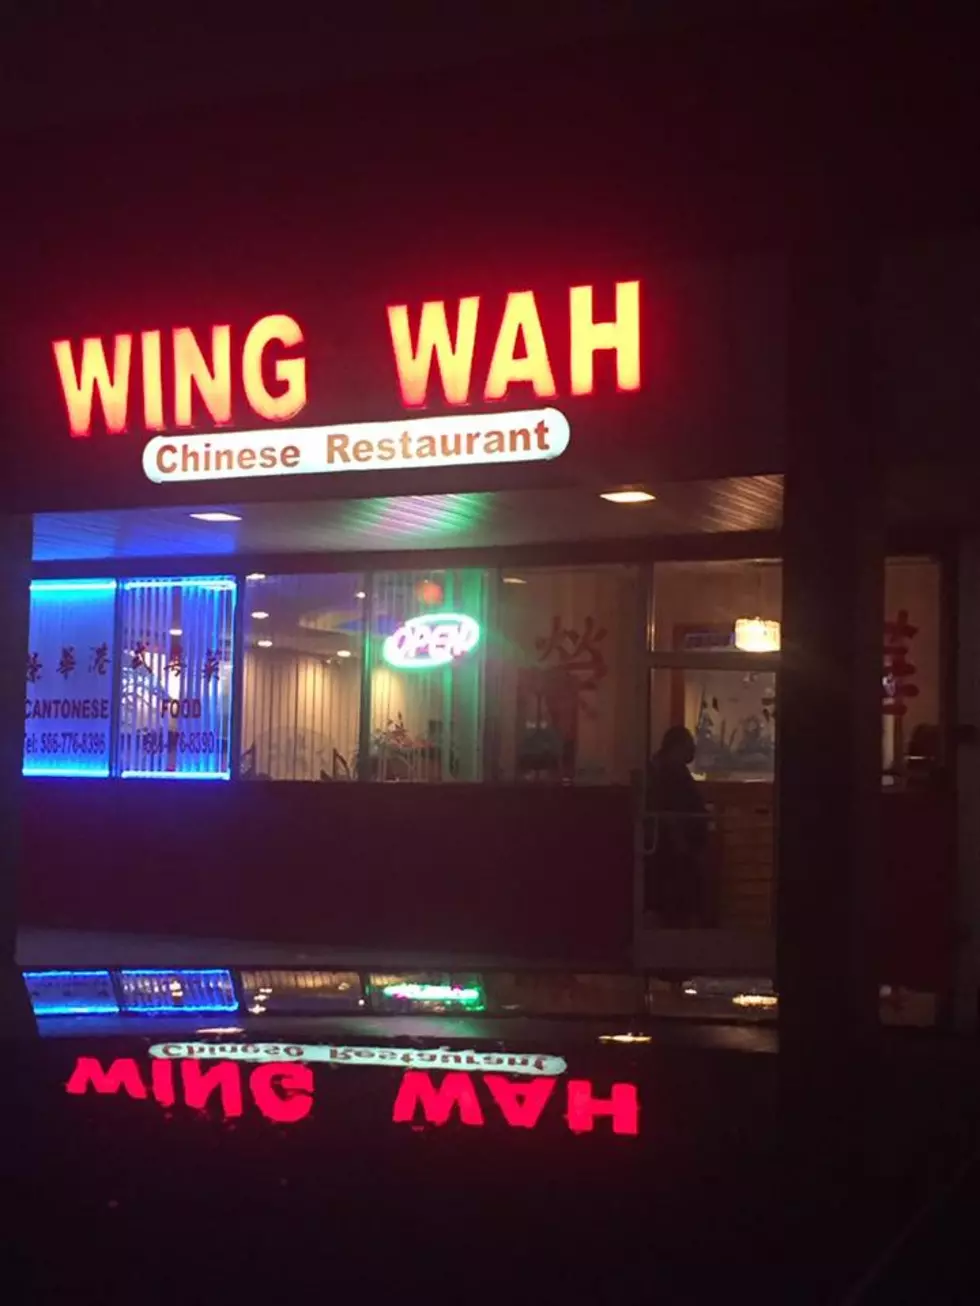 Video Allegedly Shows MI Chinese Place Served Food With Maggots